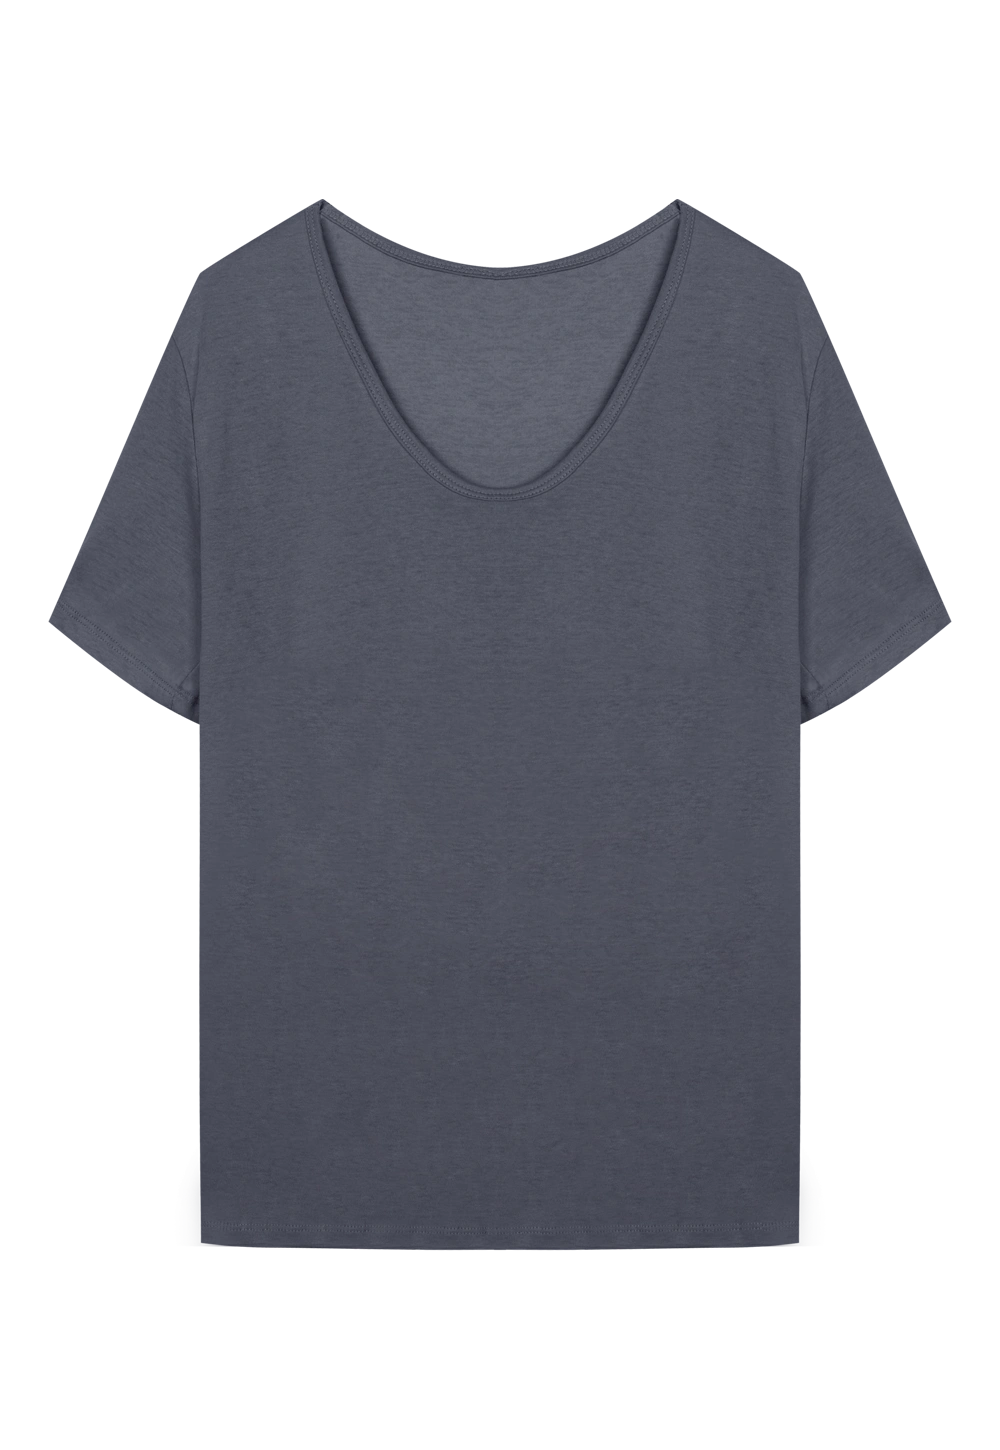 Women's  Short Sleeve T-Shirt - Soft Cotton Blend, Classic Fit, Ideal for Everyday Wear